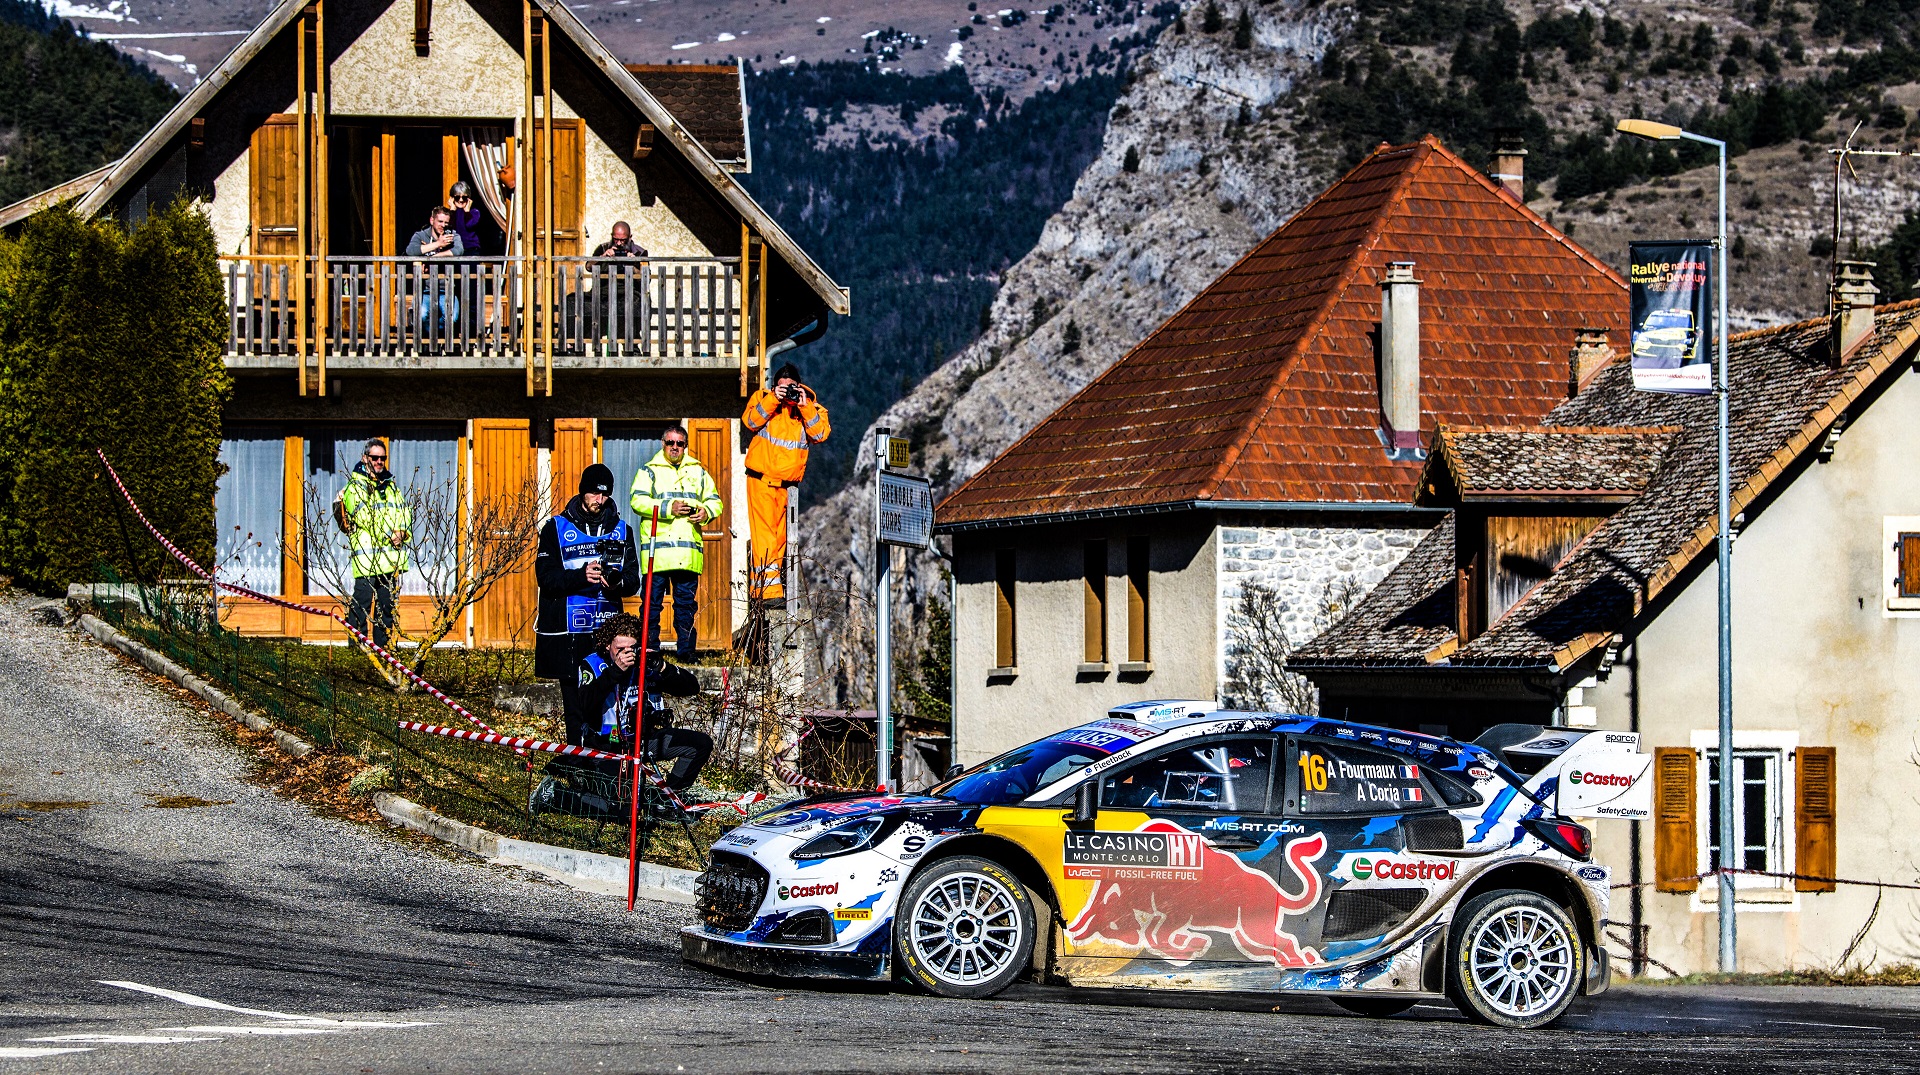 Adrien Fourmaux (FRA) and Alex Coria (FRA) are seen competing during the World Rally Championship Monte-Carlo in Gap, France on 27.01.2024 // @World / Red Bull Content Pool // SI202401270354 // Usage for editorial use only //